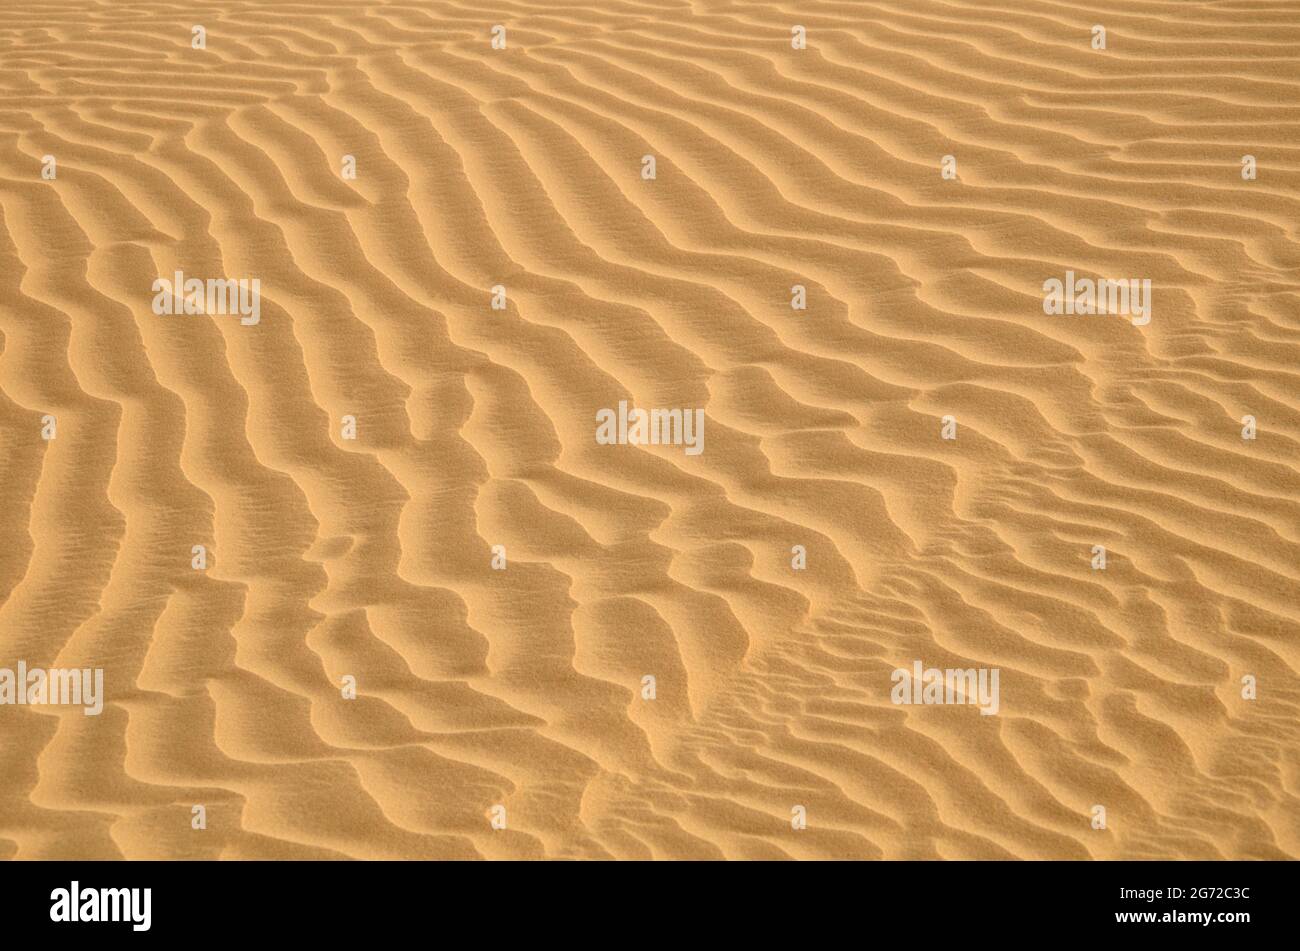 Nice sand pattern and light effect Stock Photo